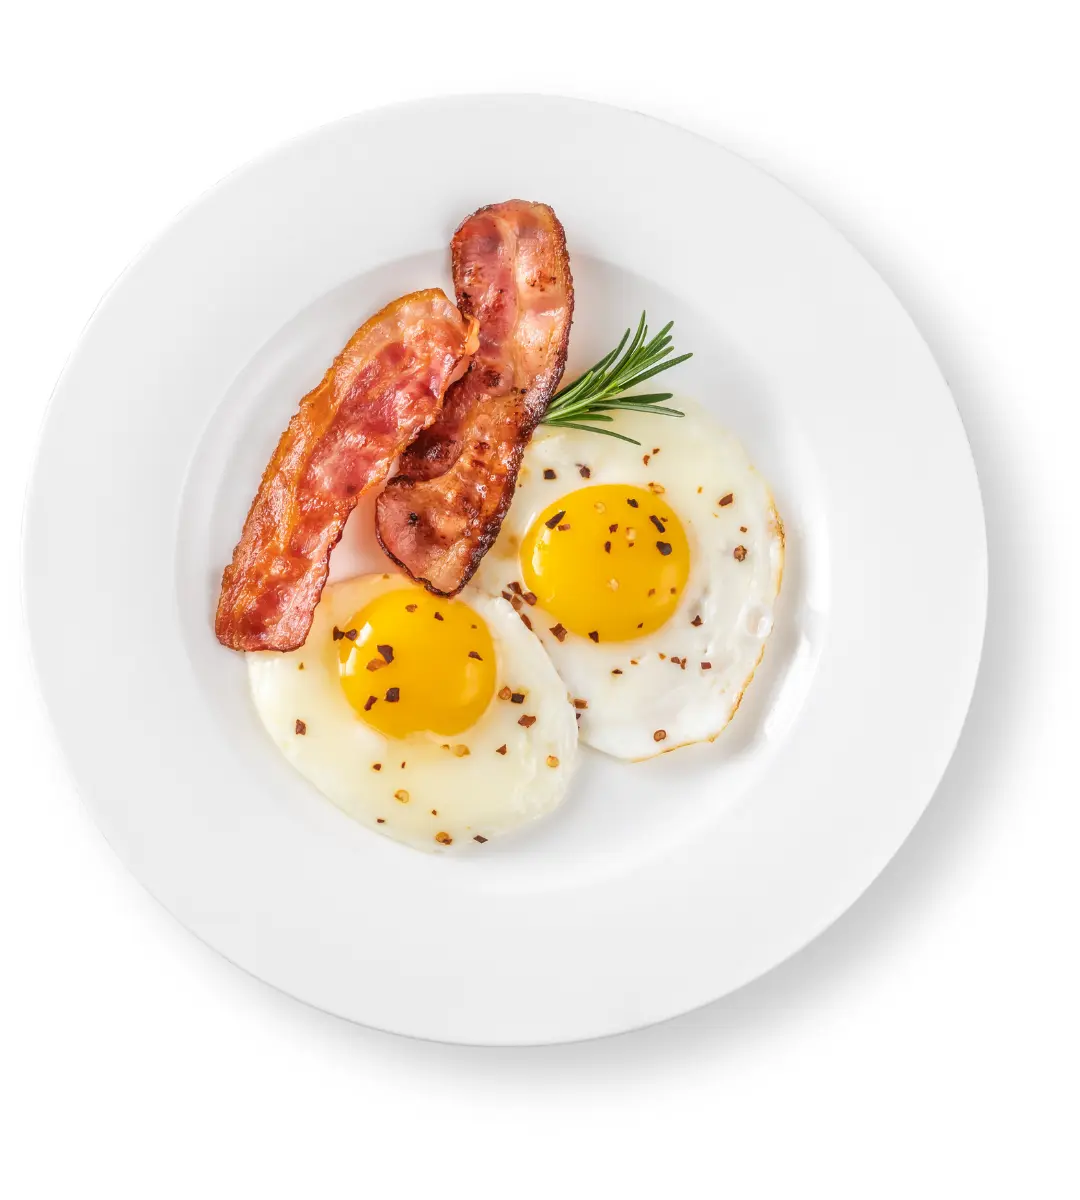 Plate of bacon and eggs.